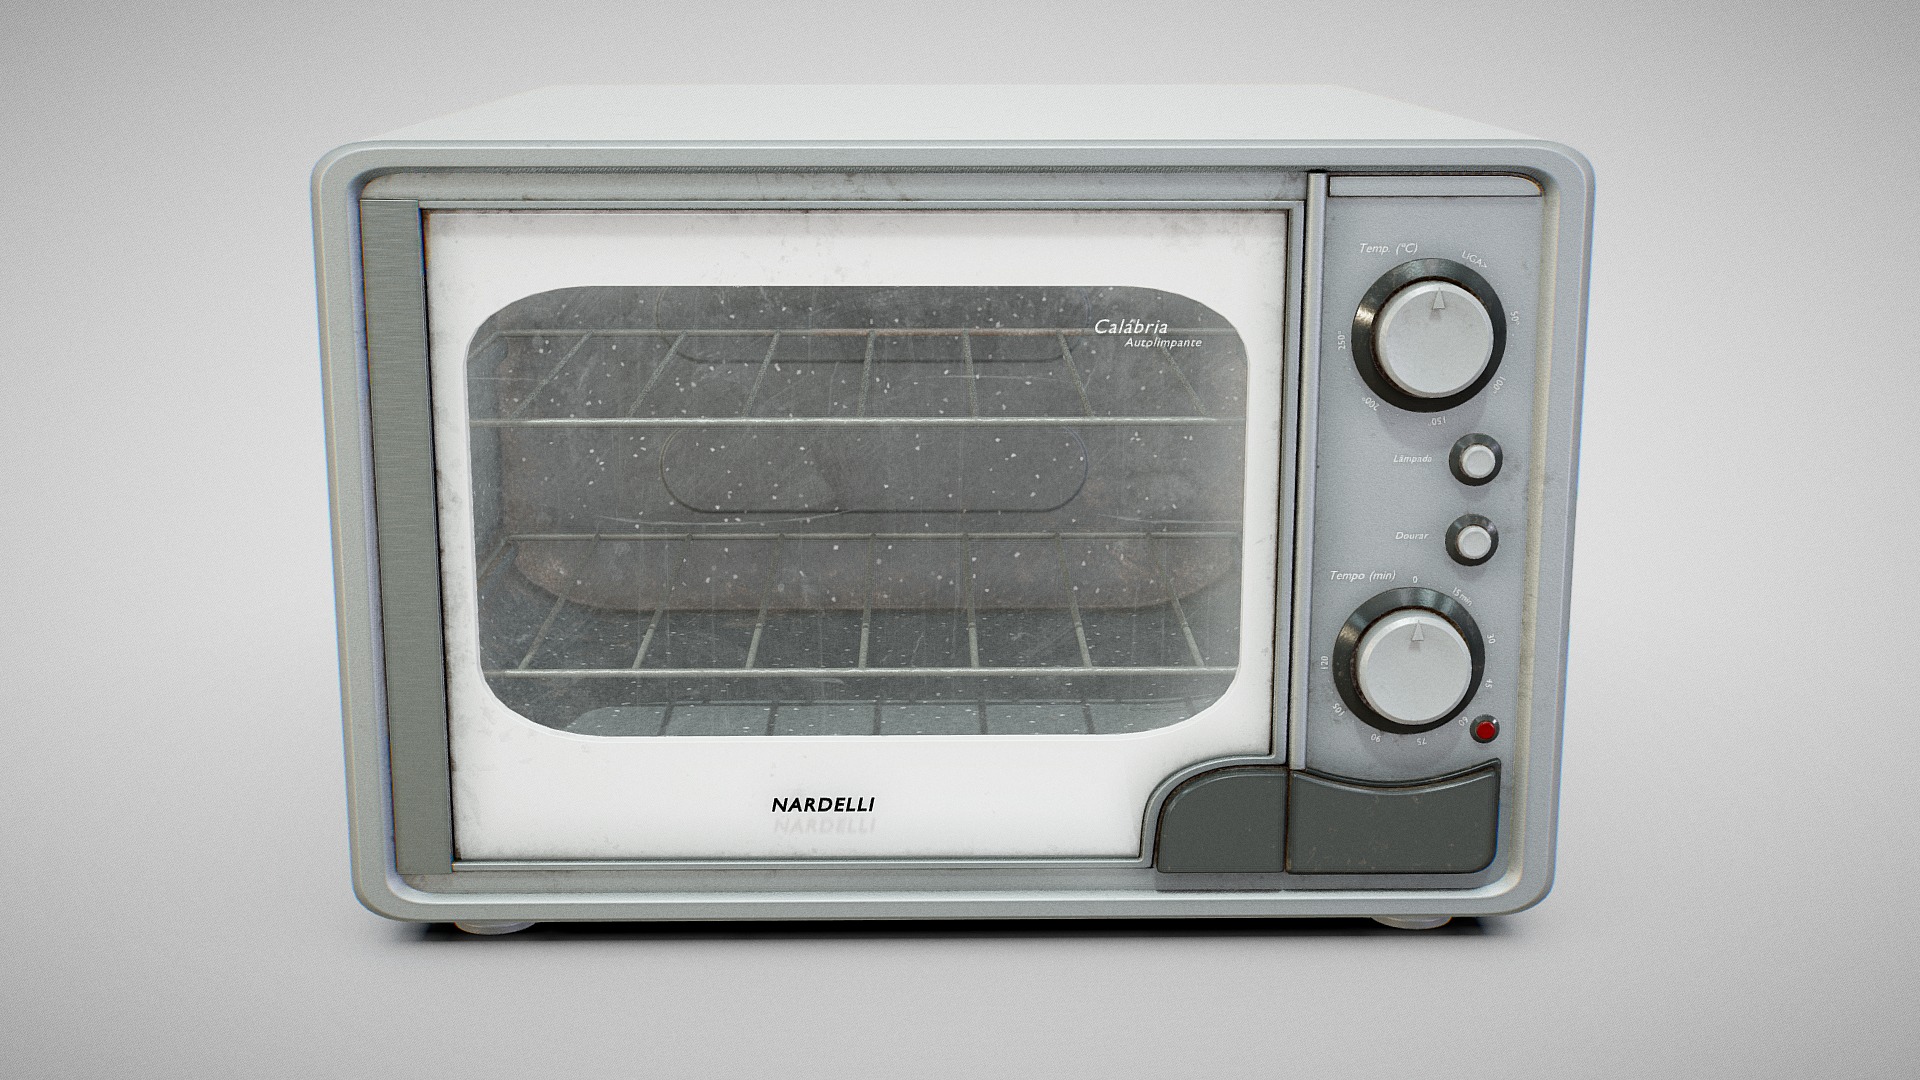 3D model Oven – Nardelli Calabria (Used) - This is a 3D model of the Oven - Nardelli Calabria (Used). The 3D model is about a white rectangular object with buttons.